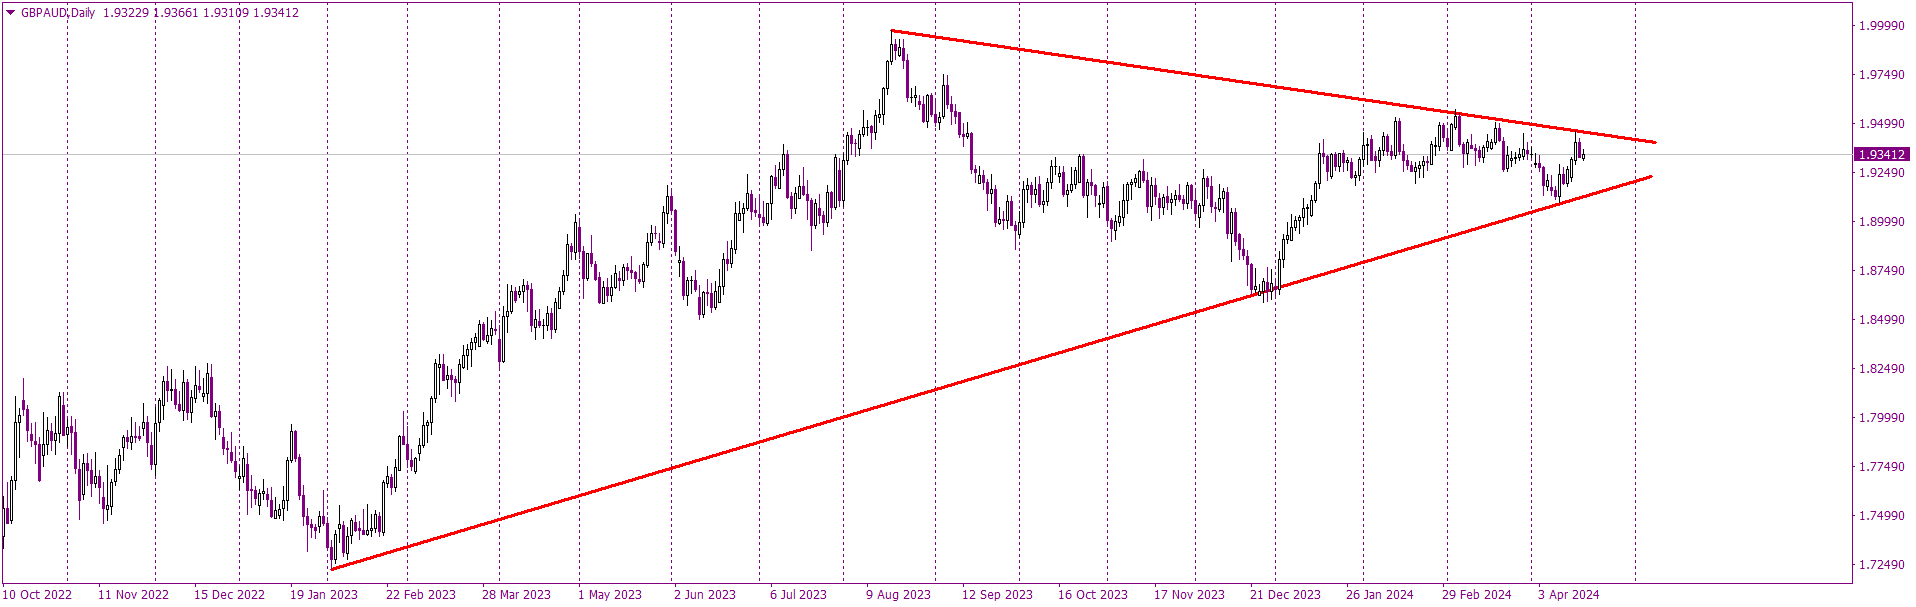 GBP/AUD Nearing Symmetric Triangle Conclusion